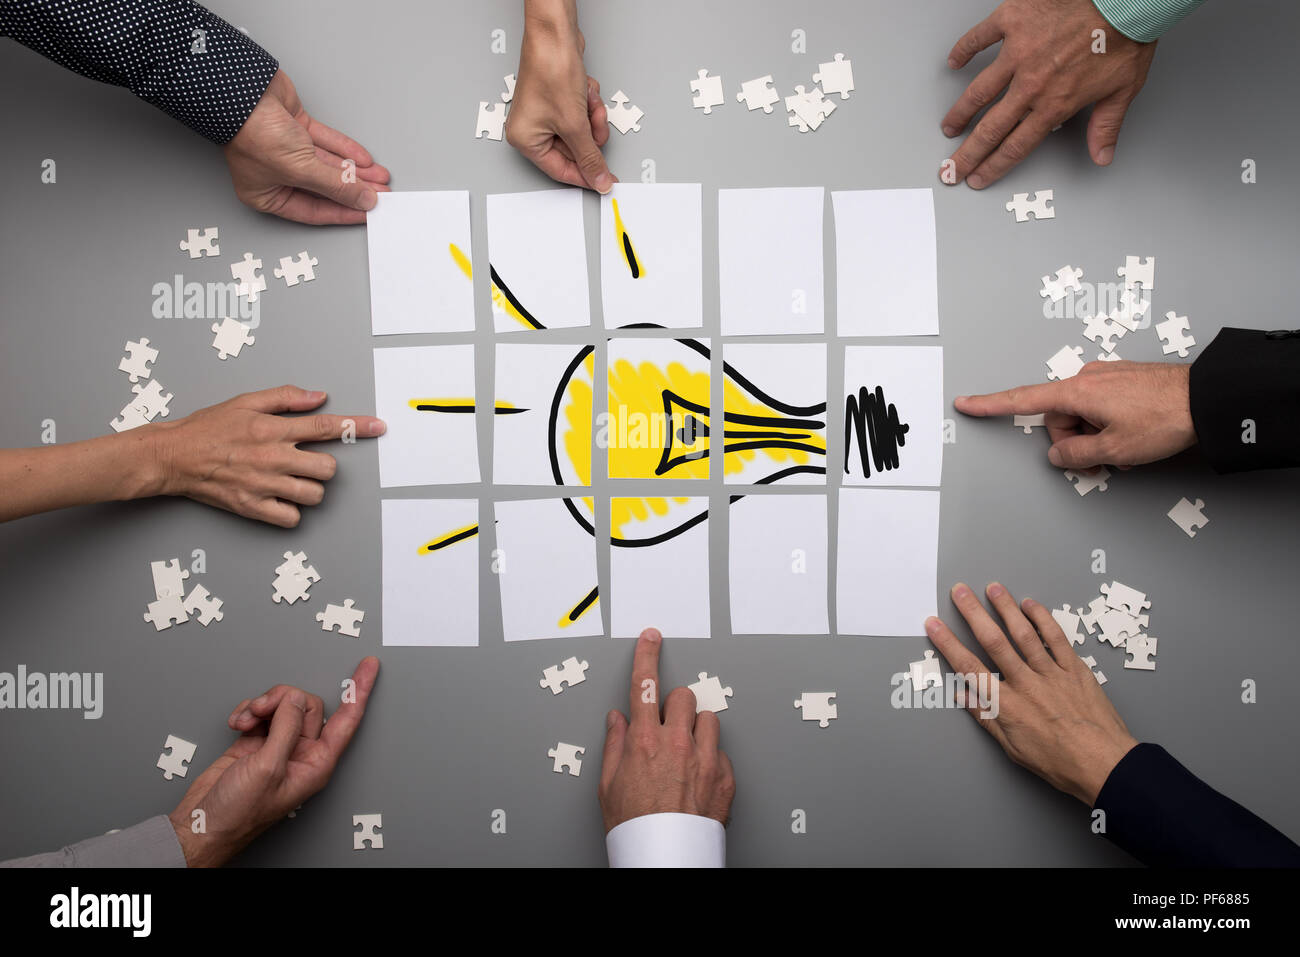 Top view of businesspeople hands touching white papers arranged on a gray table forming a yellow light bulb. Conceptual for brainstorming and teamwork Stock Photo